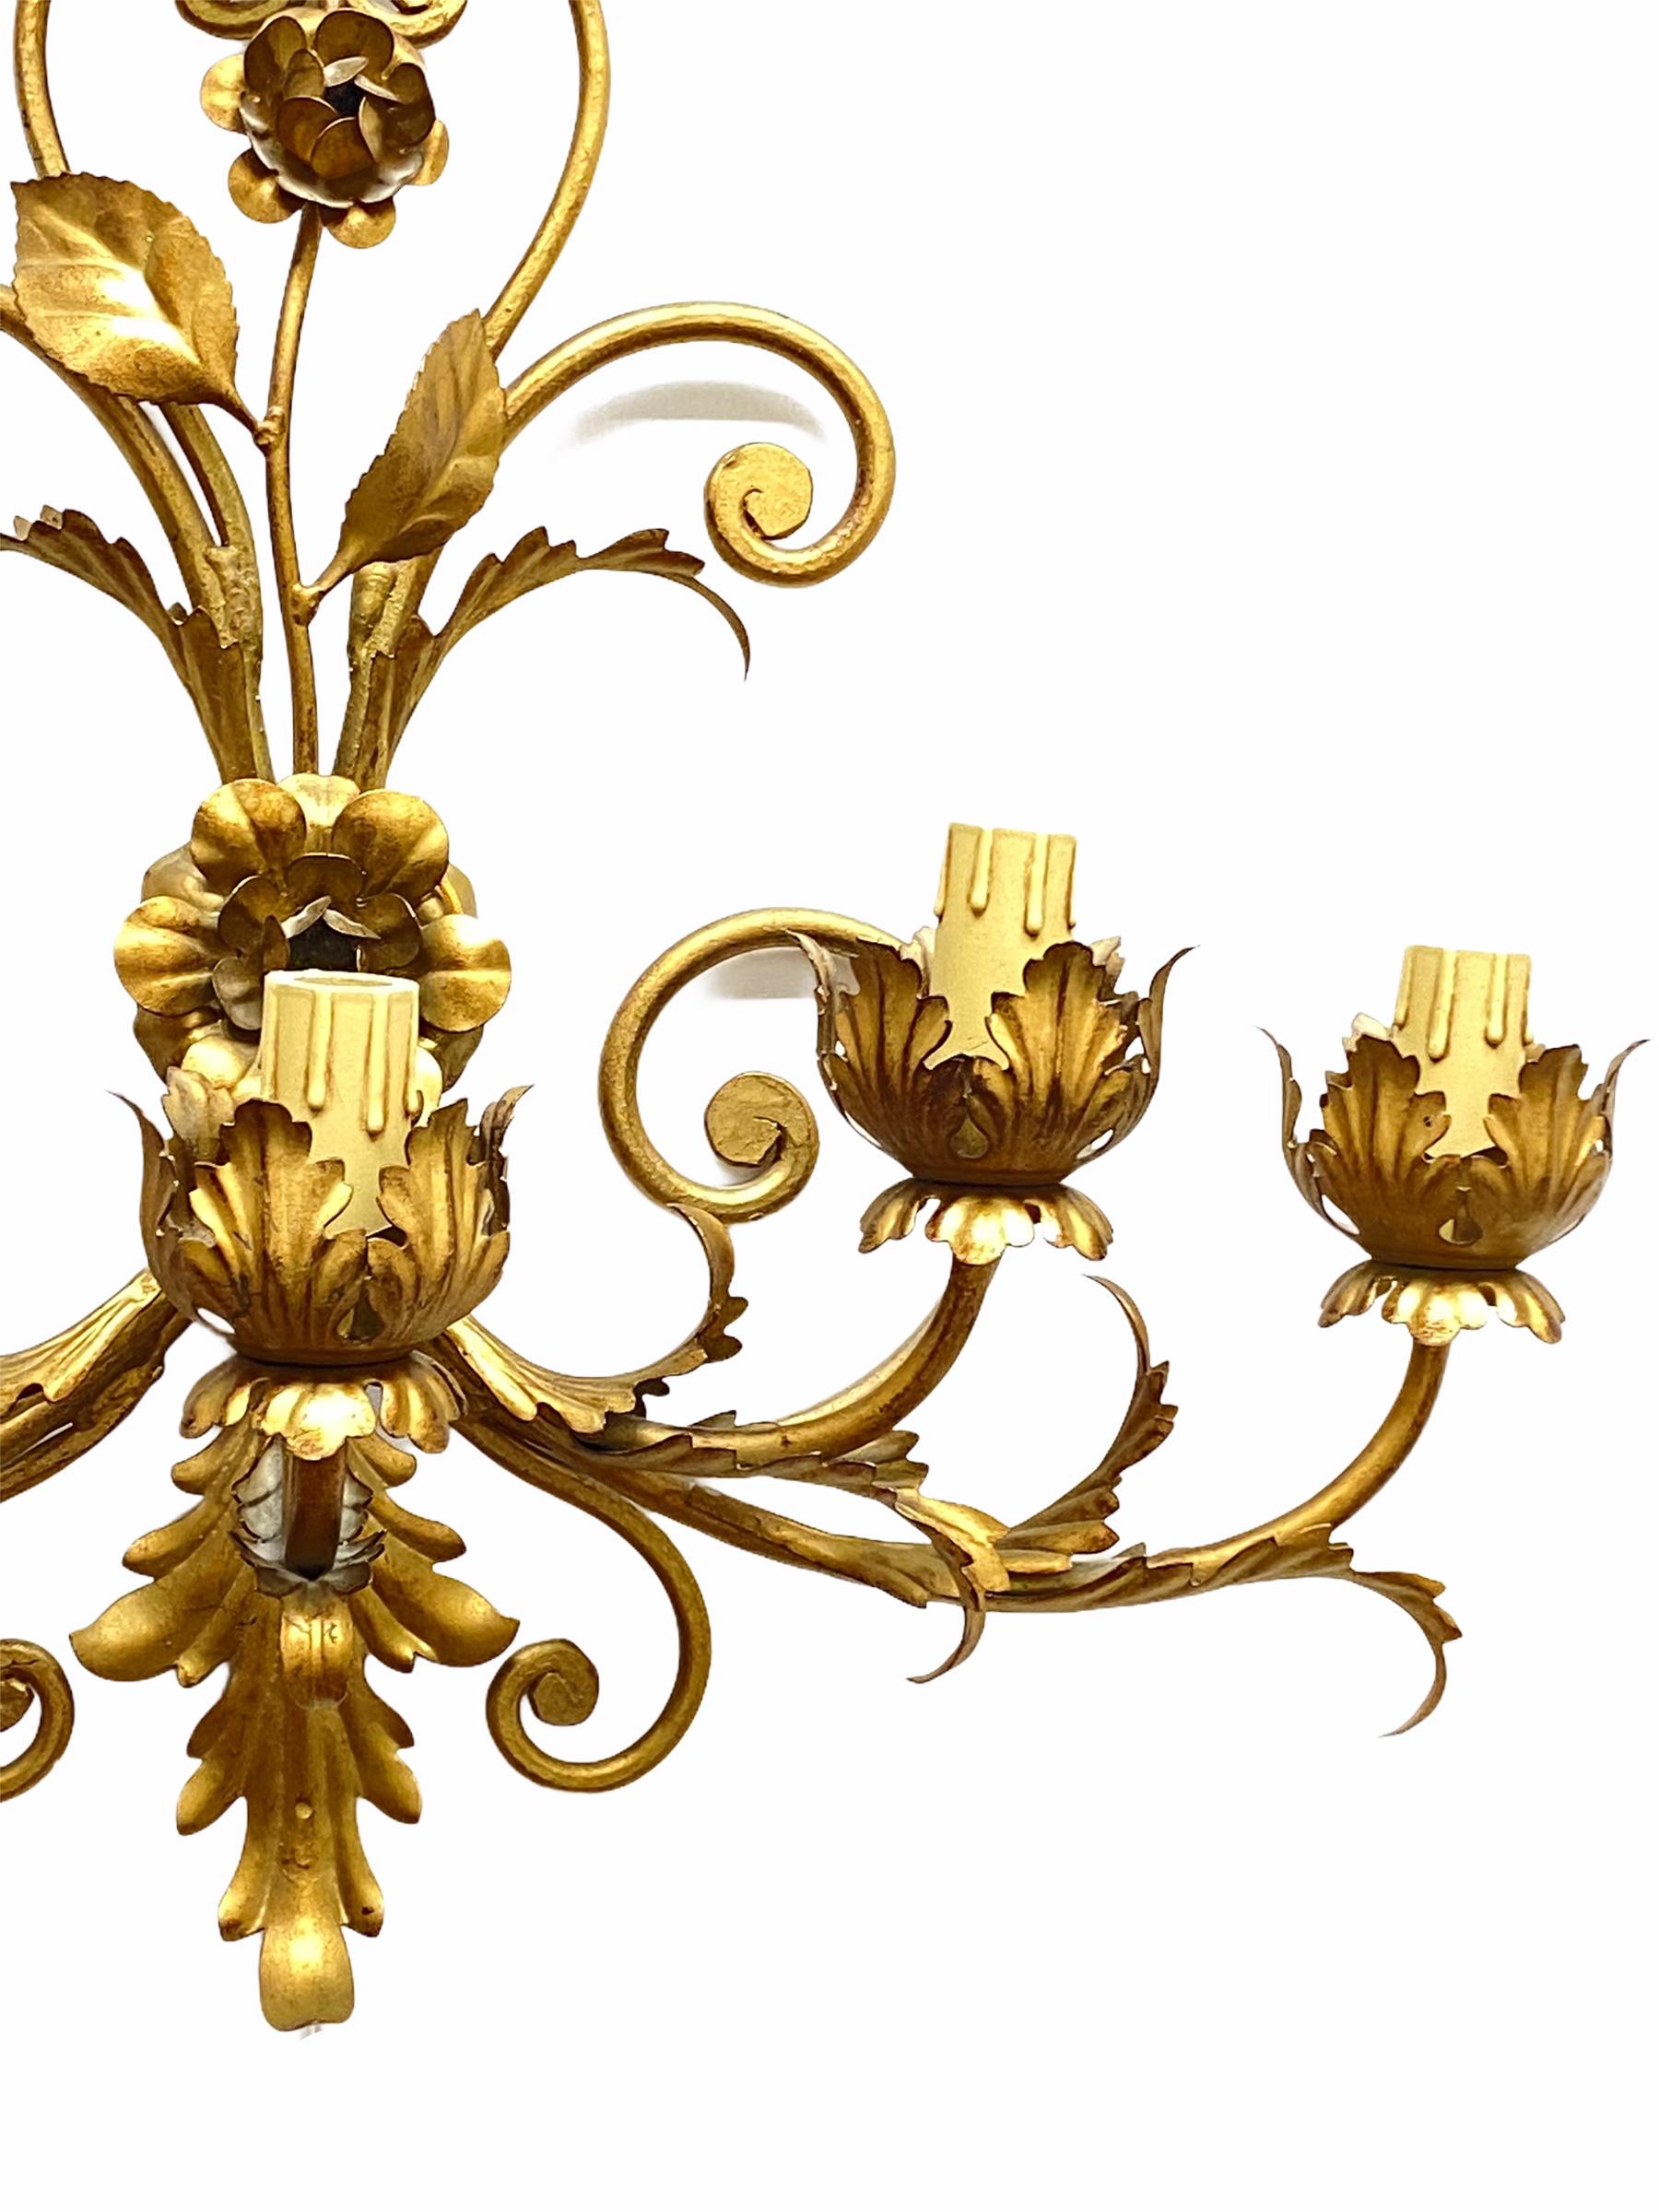 Italian Stunning Five-Light Gilt Metal Leafs Tole Hollywood Regency Sconce, Italy, 1960s For Sale